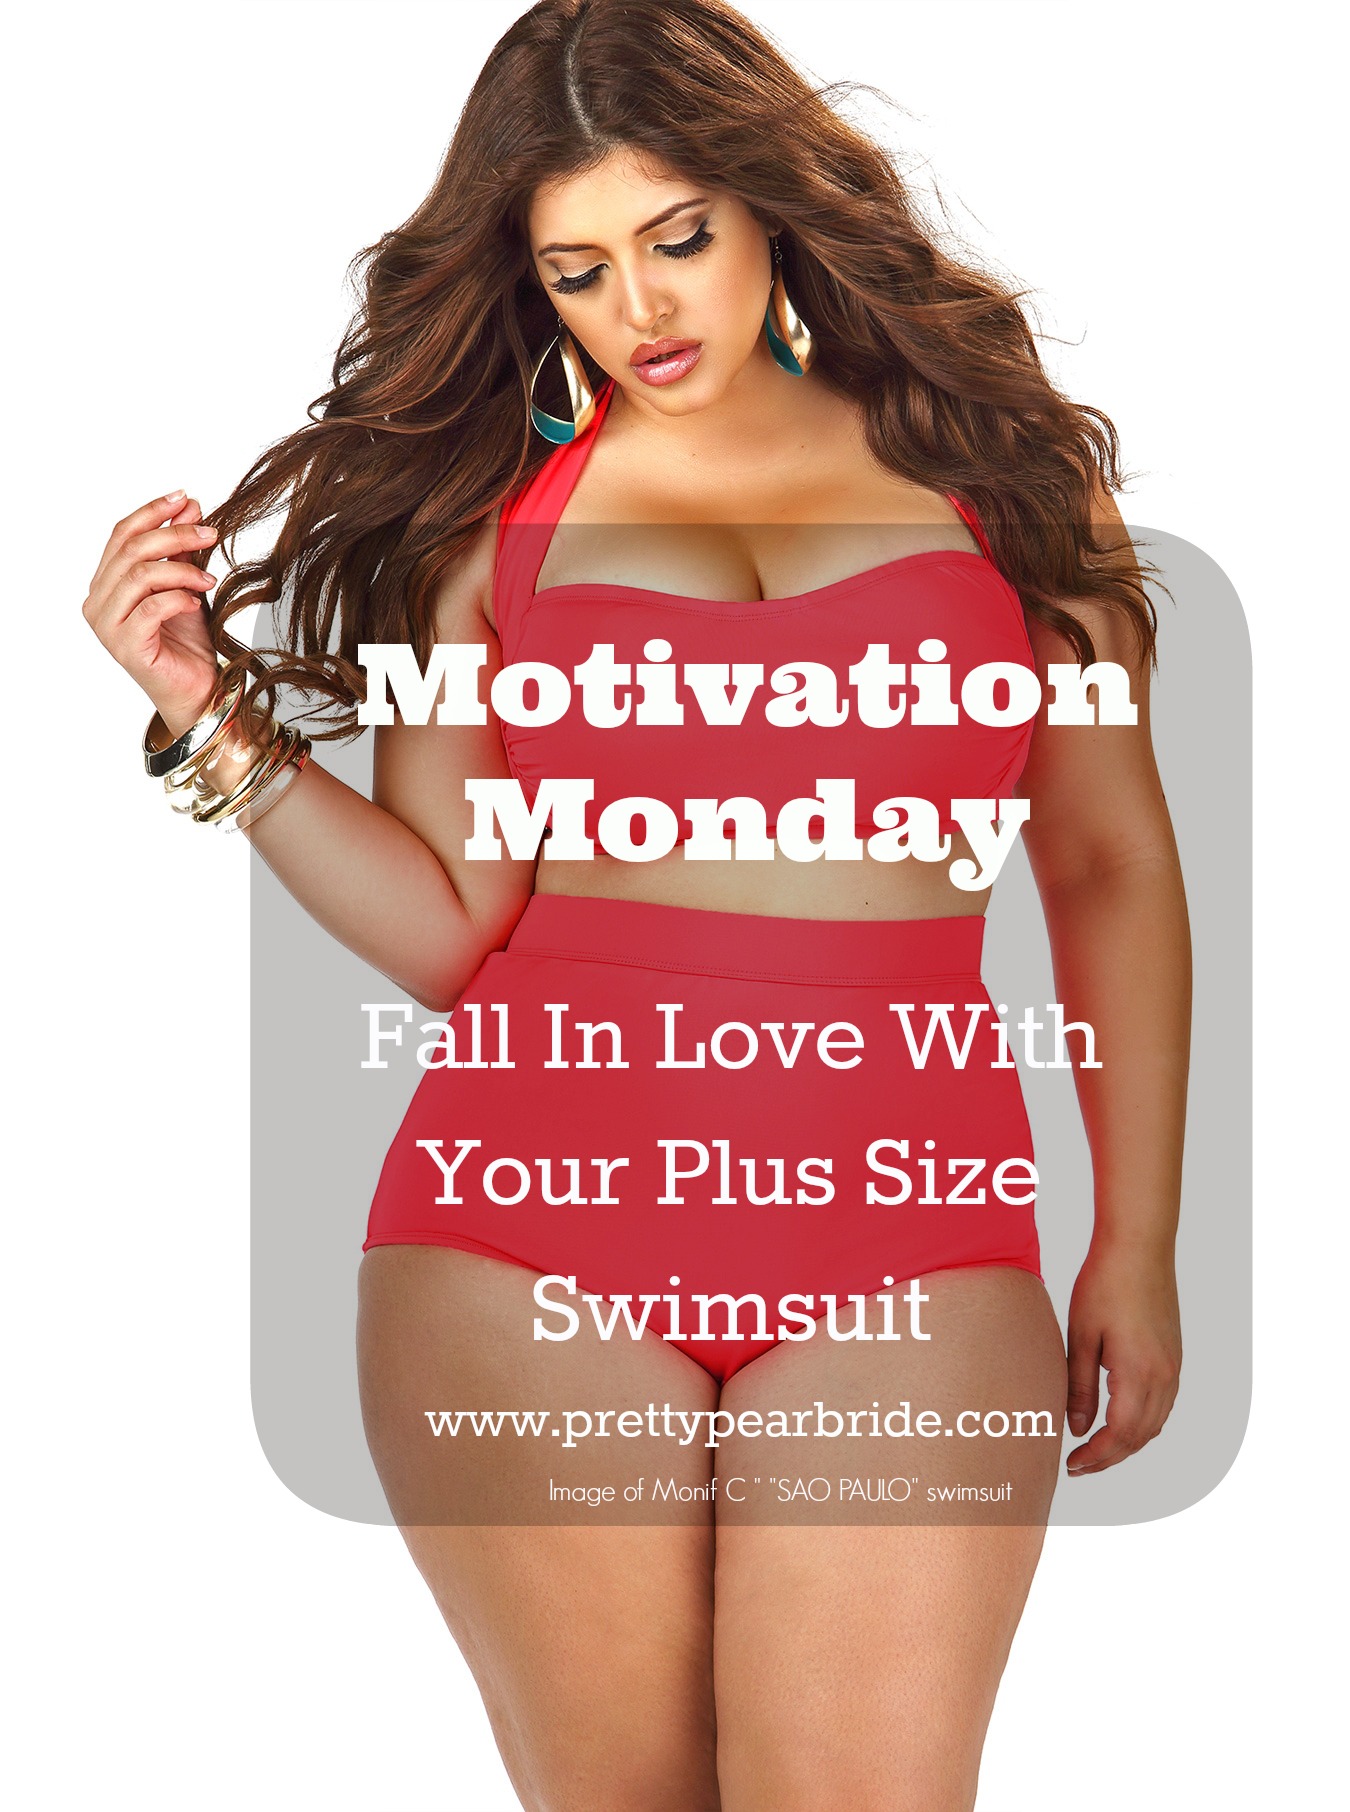 {MOTIVATION MONDAYS} Fall In Love with your Plus Size Swimsuit